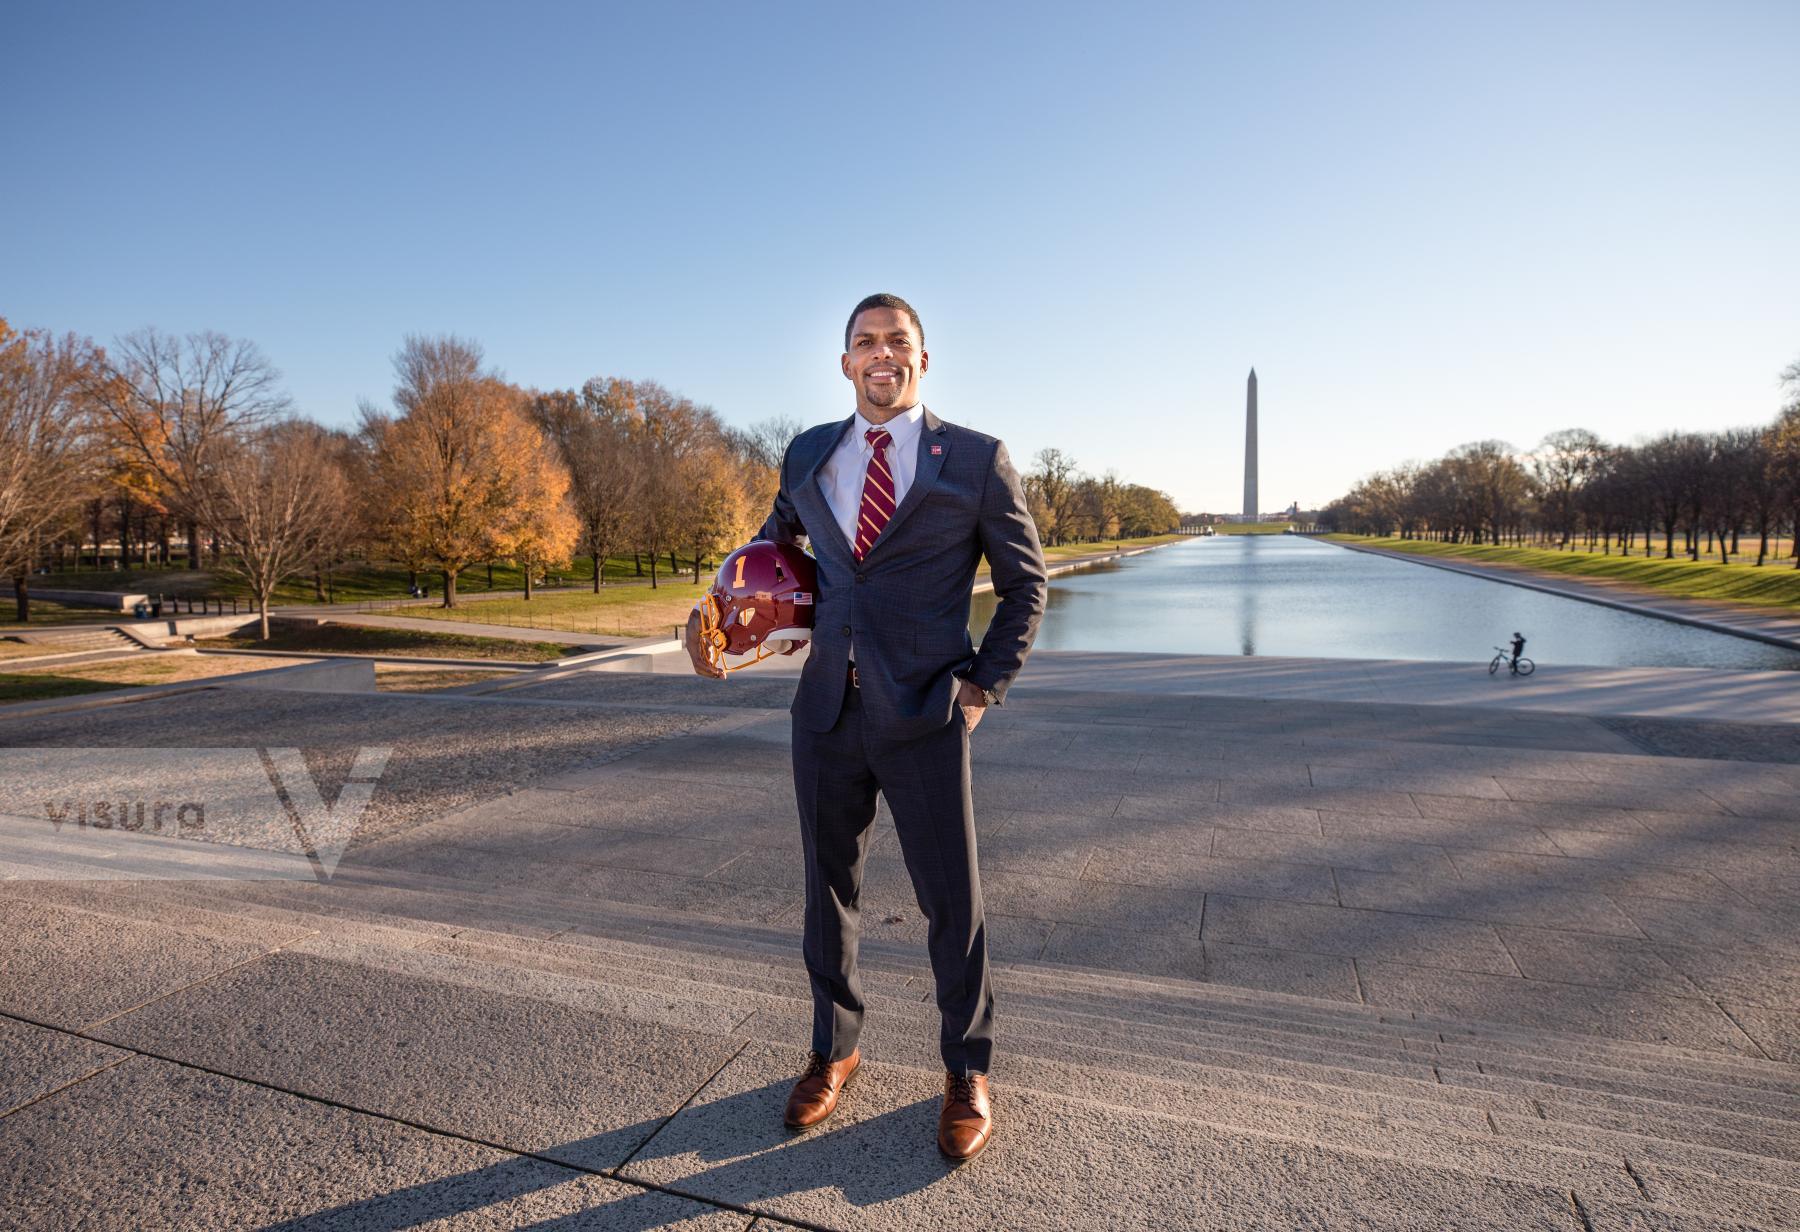 Purchase Jason Gomillion Wright, President Of The Washington Football Team of the National Football League by Eman Mohammed